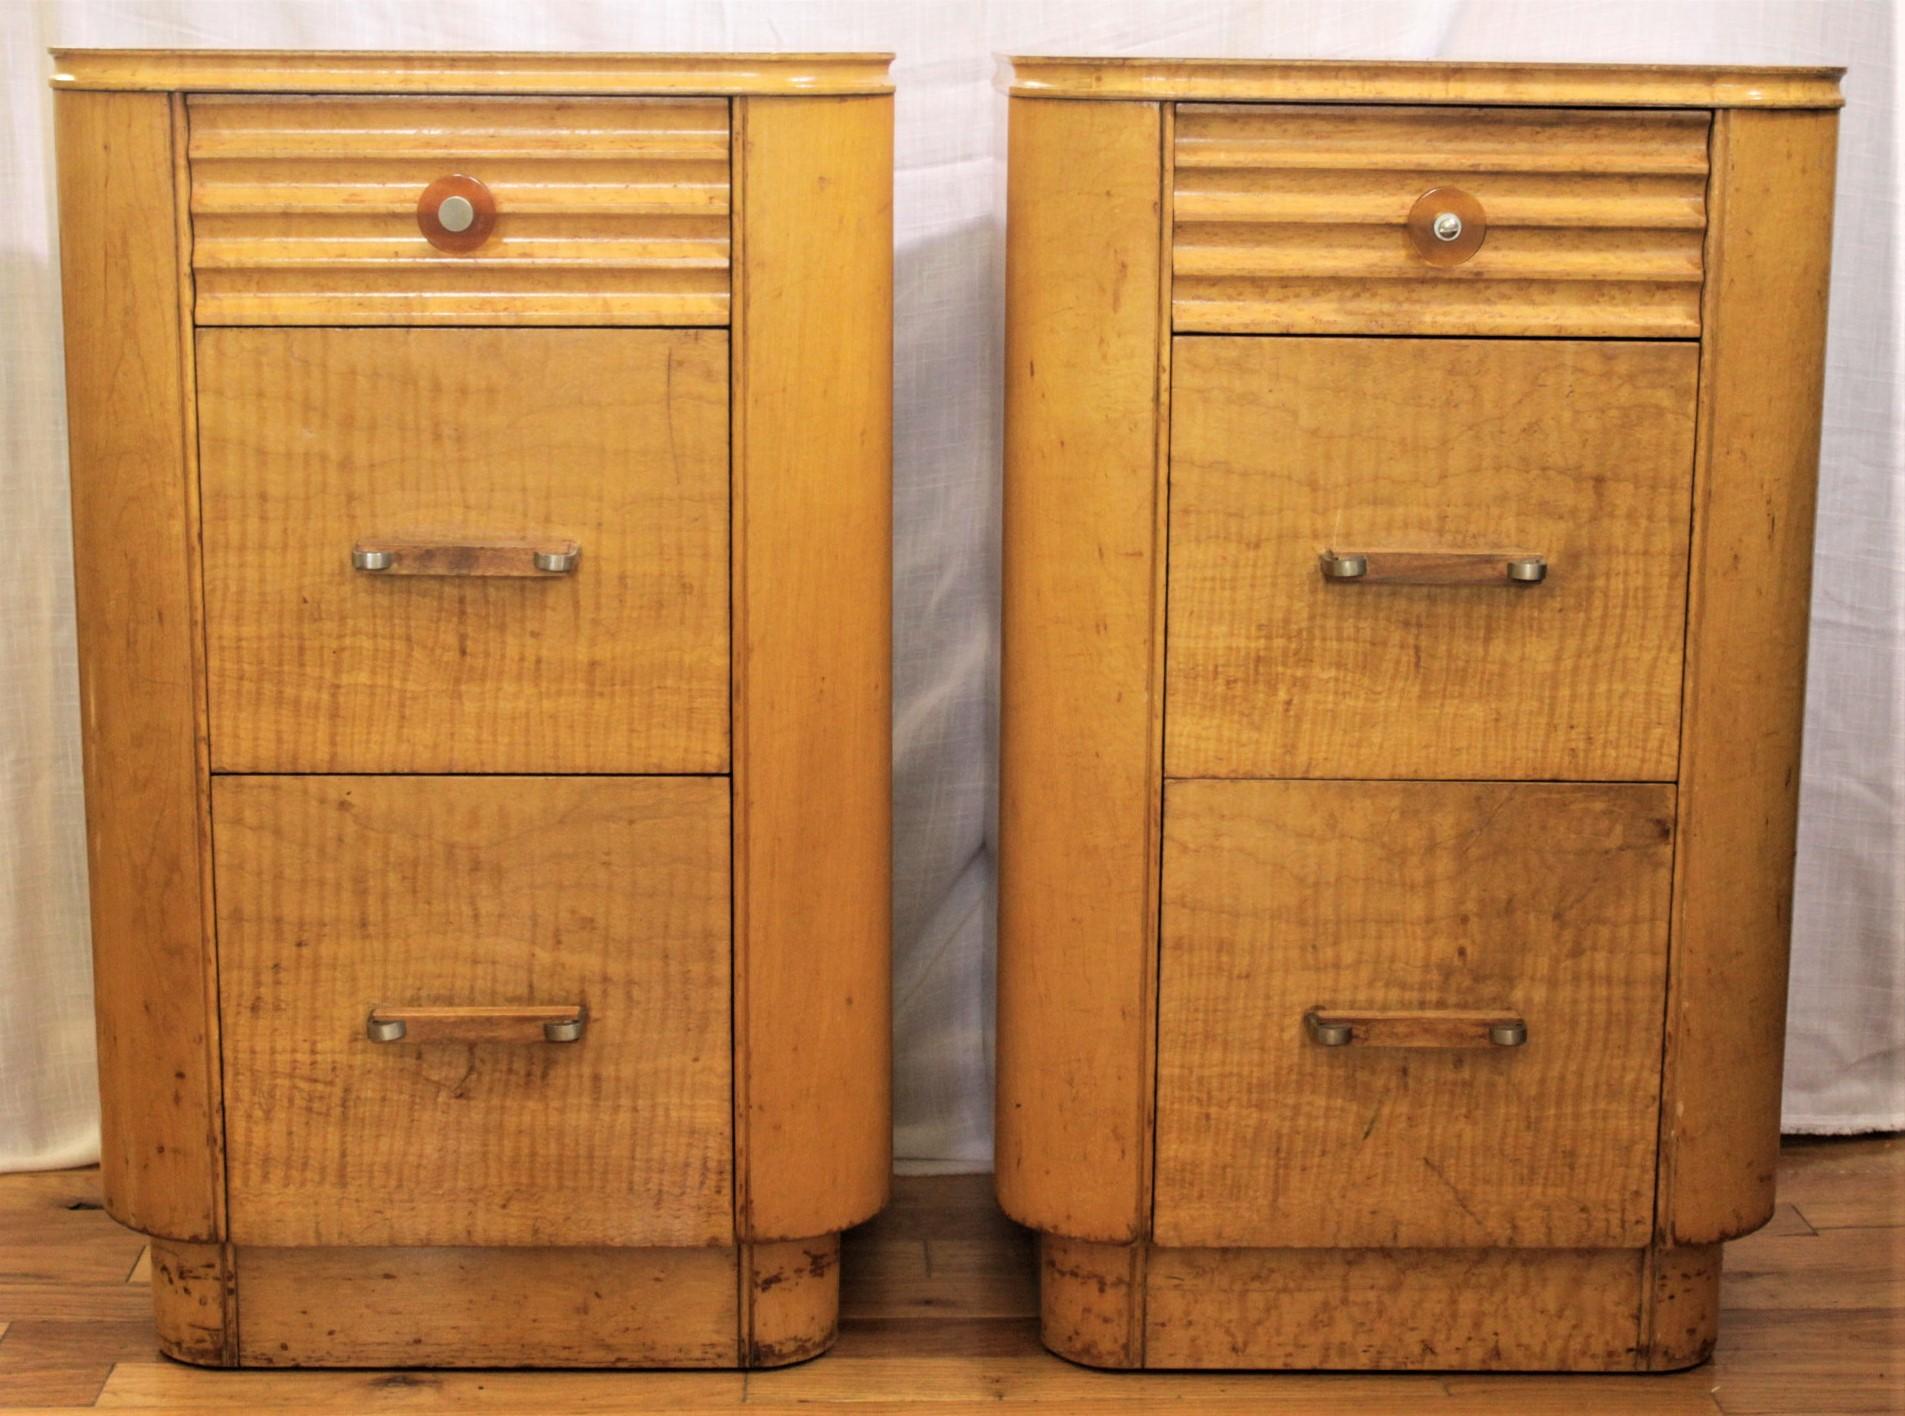 Pair of Art Deco Maple 3 Drawer Nightstands or Cabinets with Machine Age Styling For Sale 4